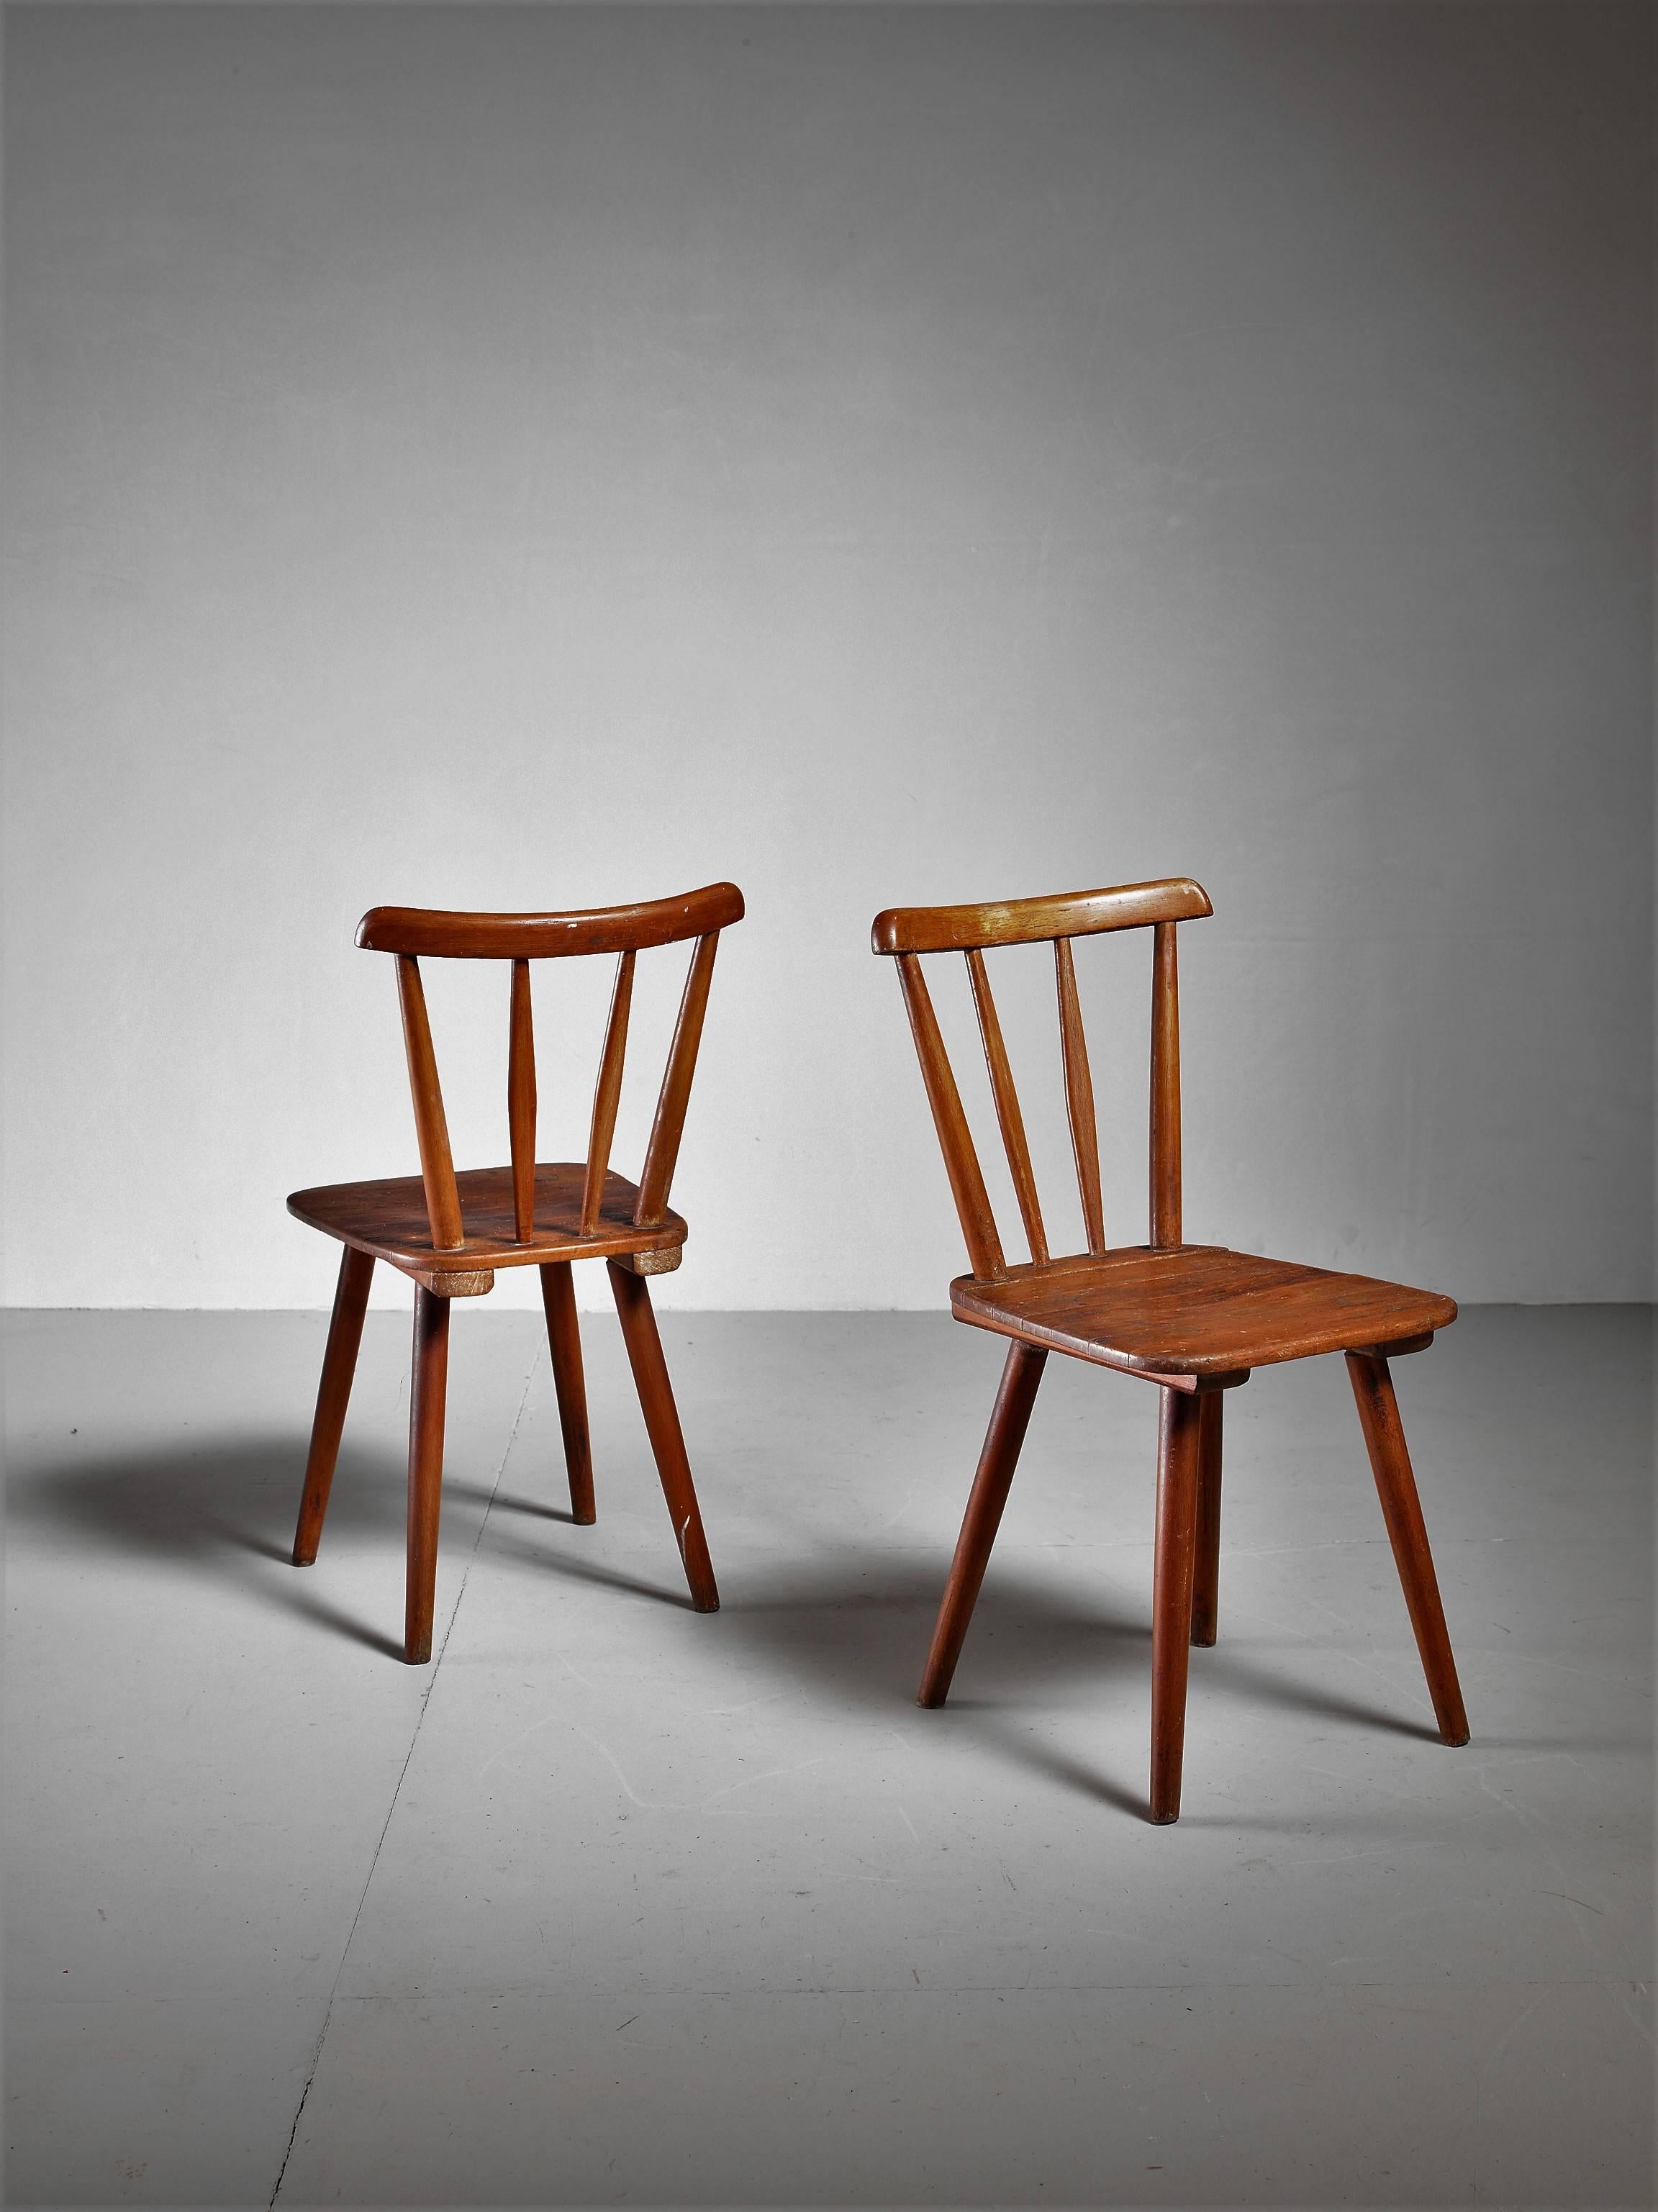 A pair of wooden ‘Tübinger’ chairs by German designer and architect Adolf G. Schneck, designed in the 1930s for the Schäfer Stuhlfabrik, Tübingen.
* These chairs are offered to you by Bloomberry, Amsterdam *

These old café style chair have a heavy